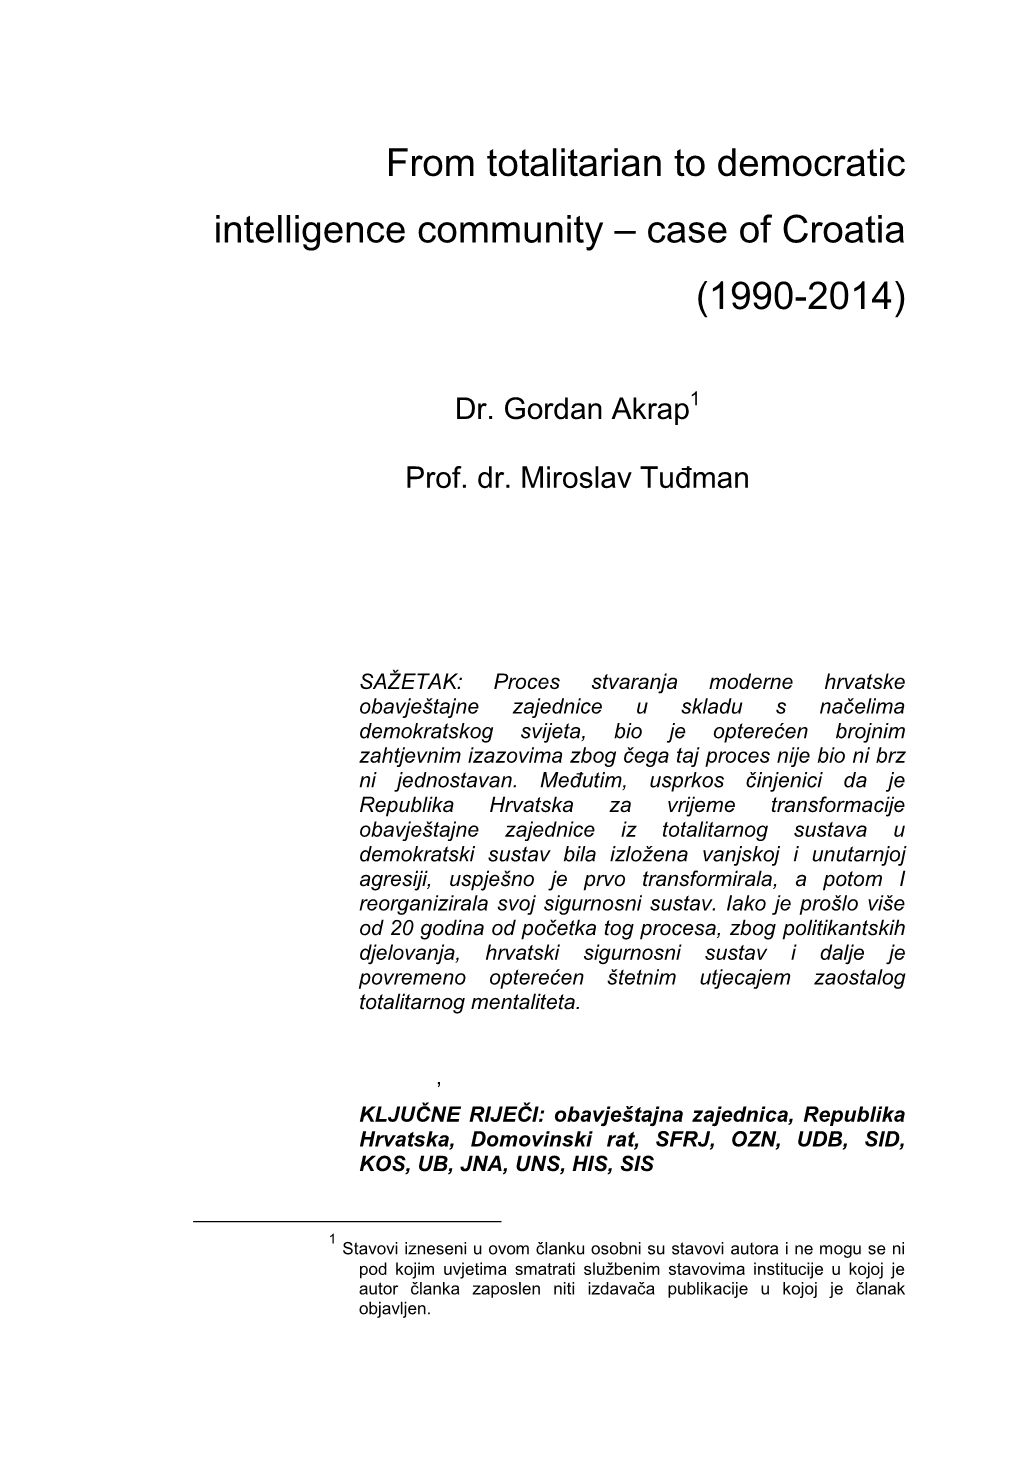 From Totalitarian to Democratic Intelligence Community – Case of Croatia (1990-2014)